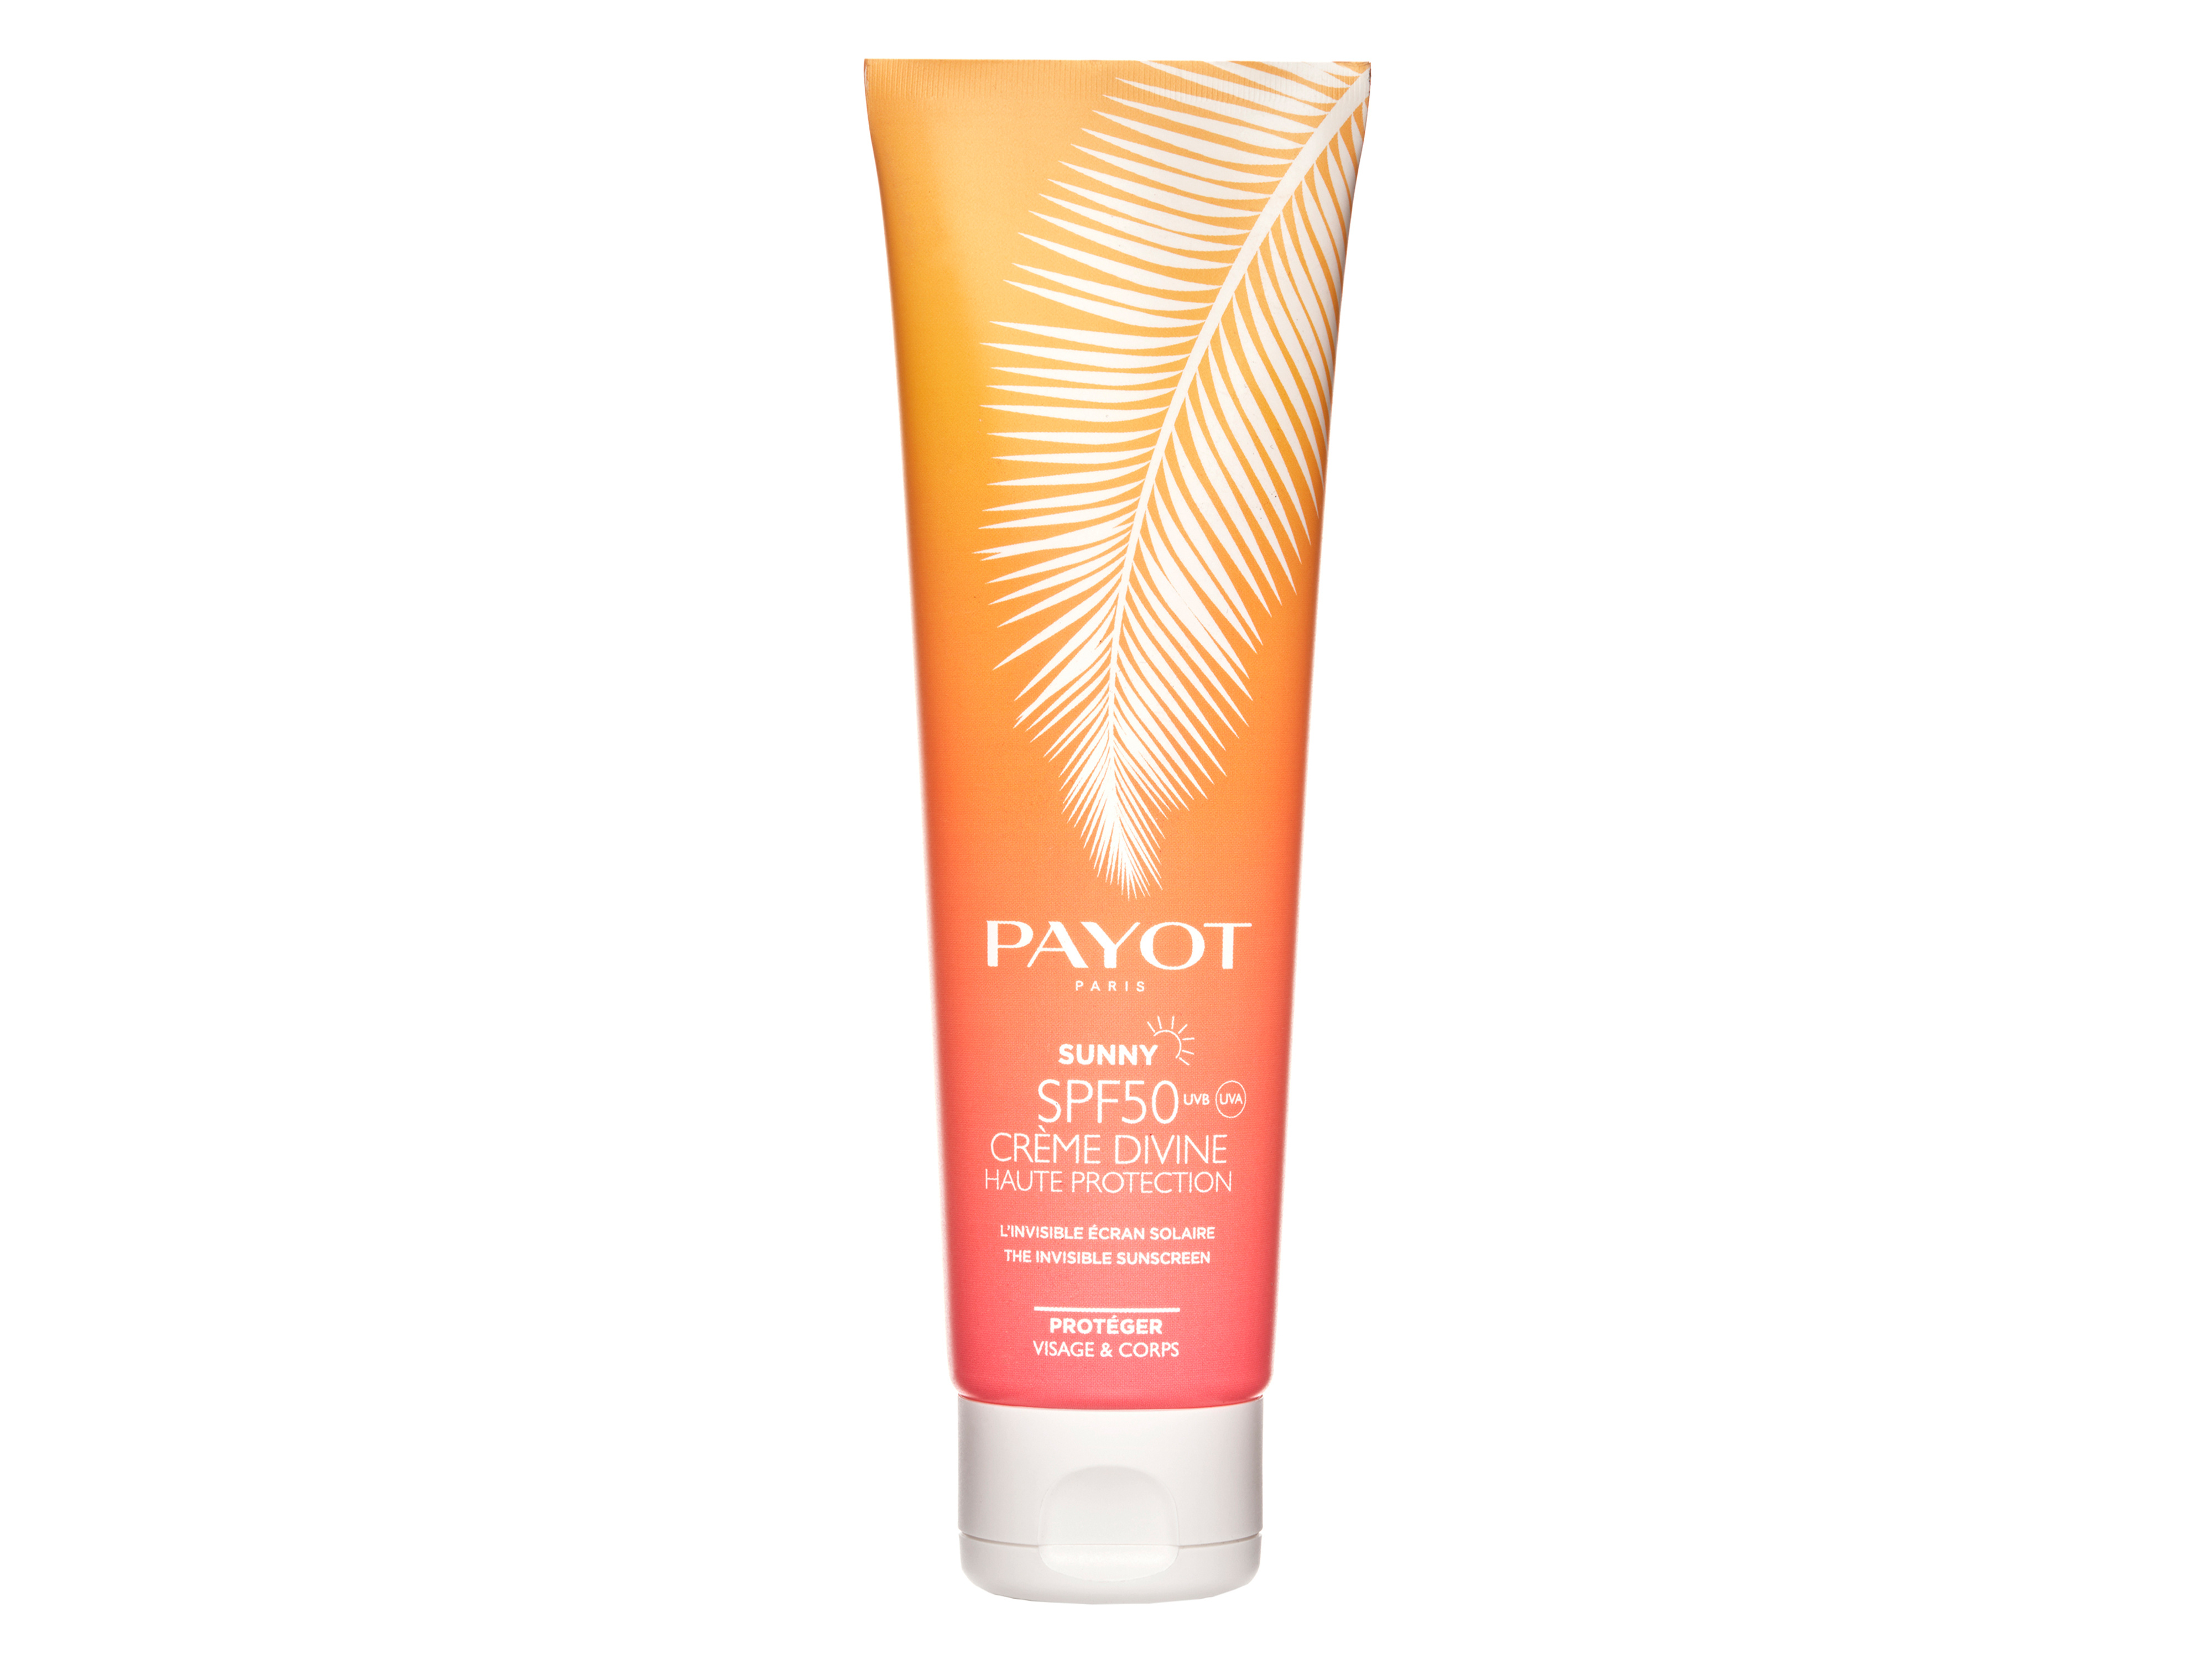 Payot Sunny Crème Divine Face and Body SPF50, 150 ml